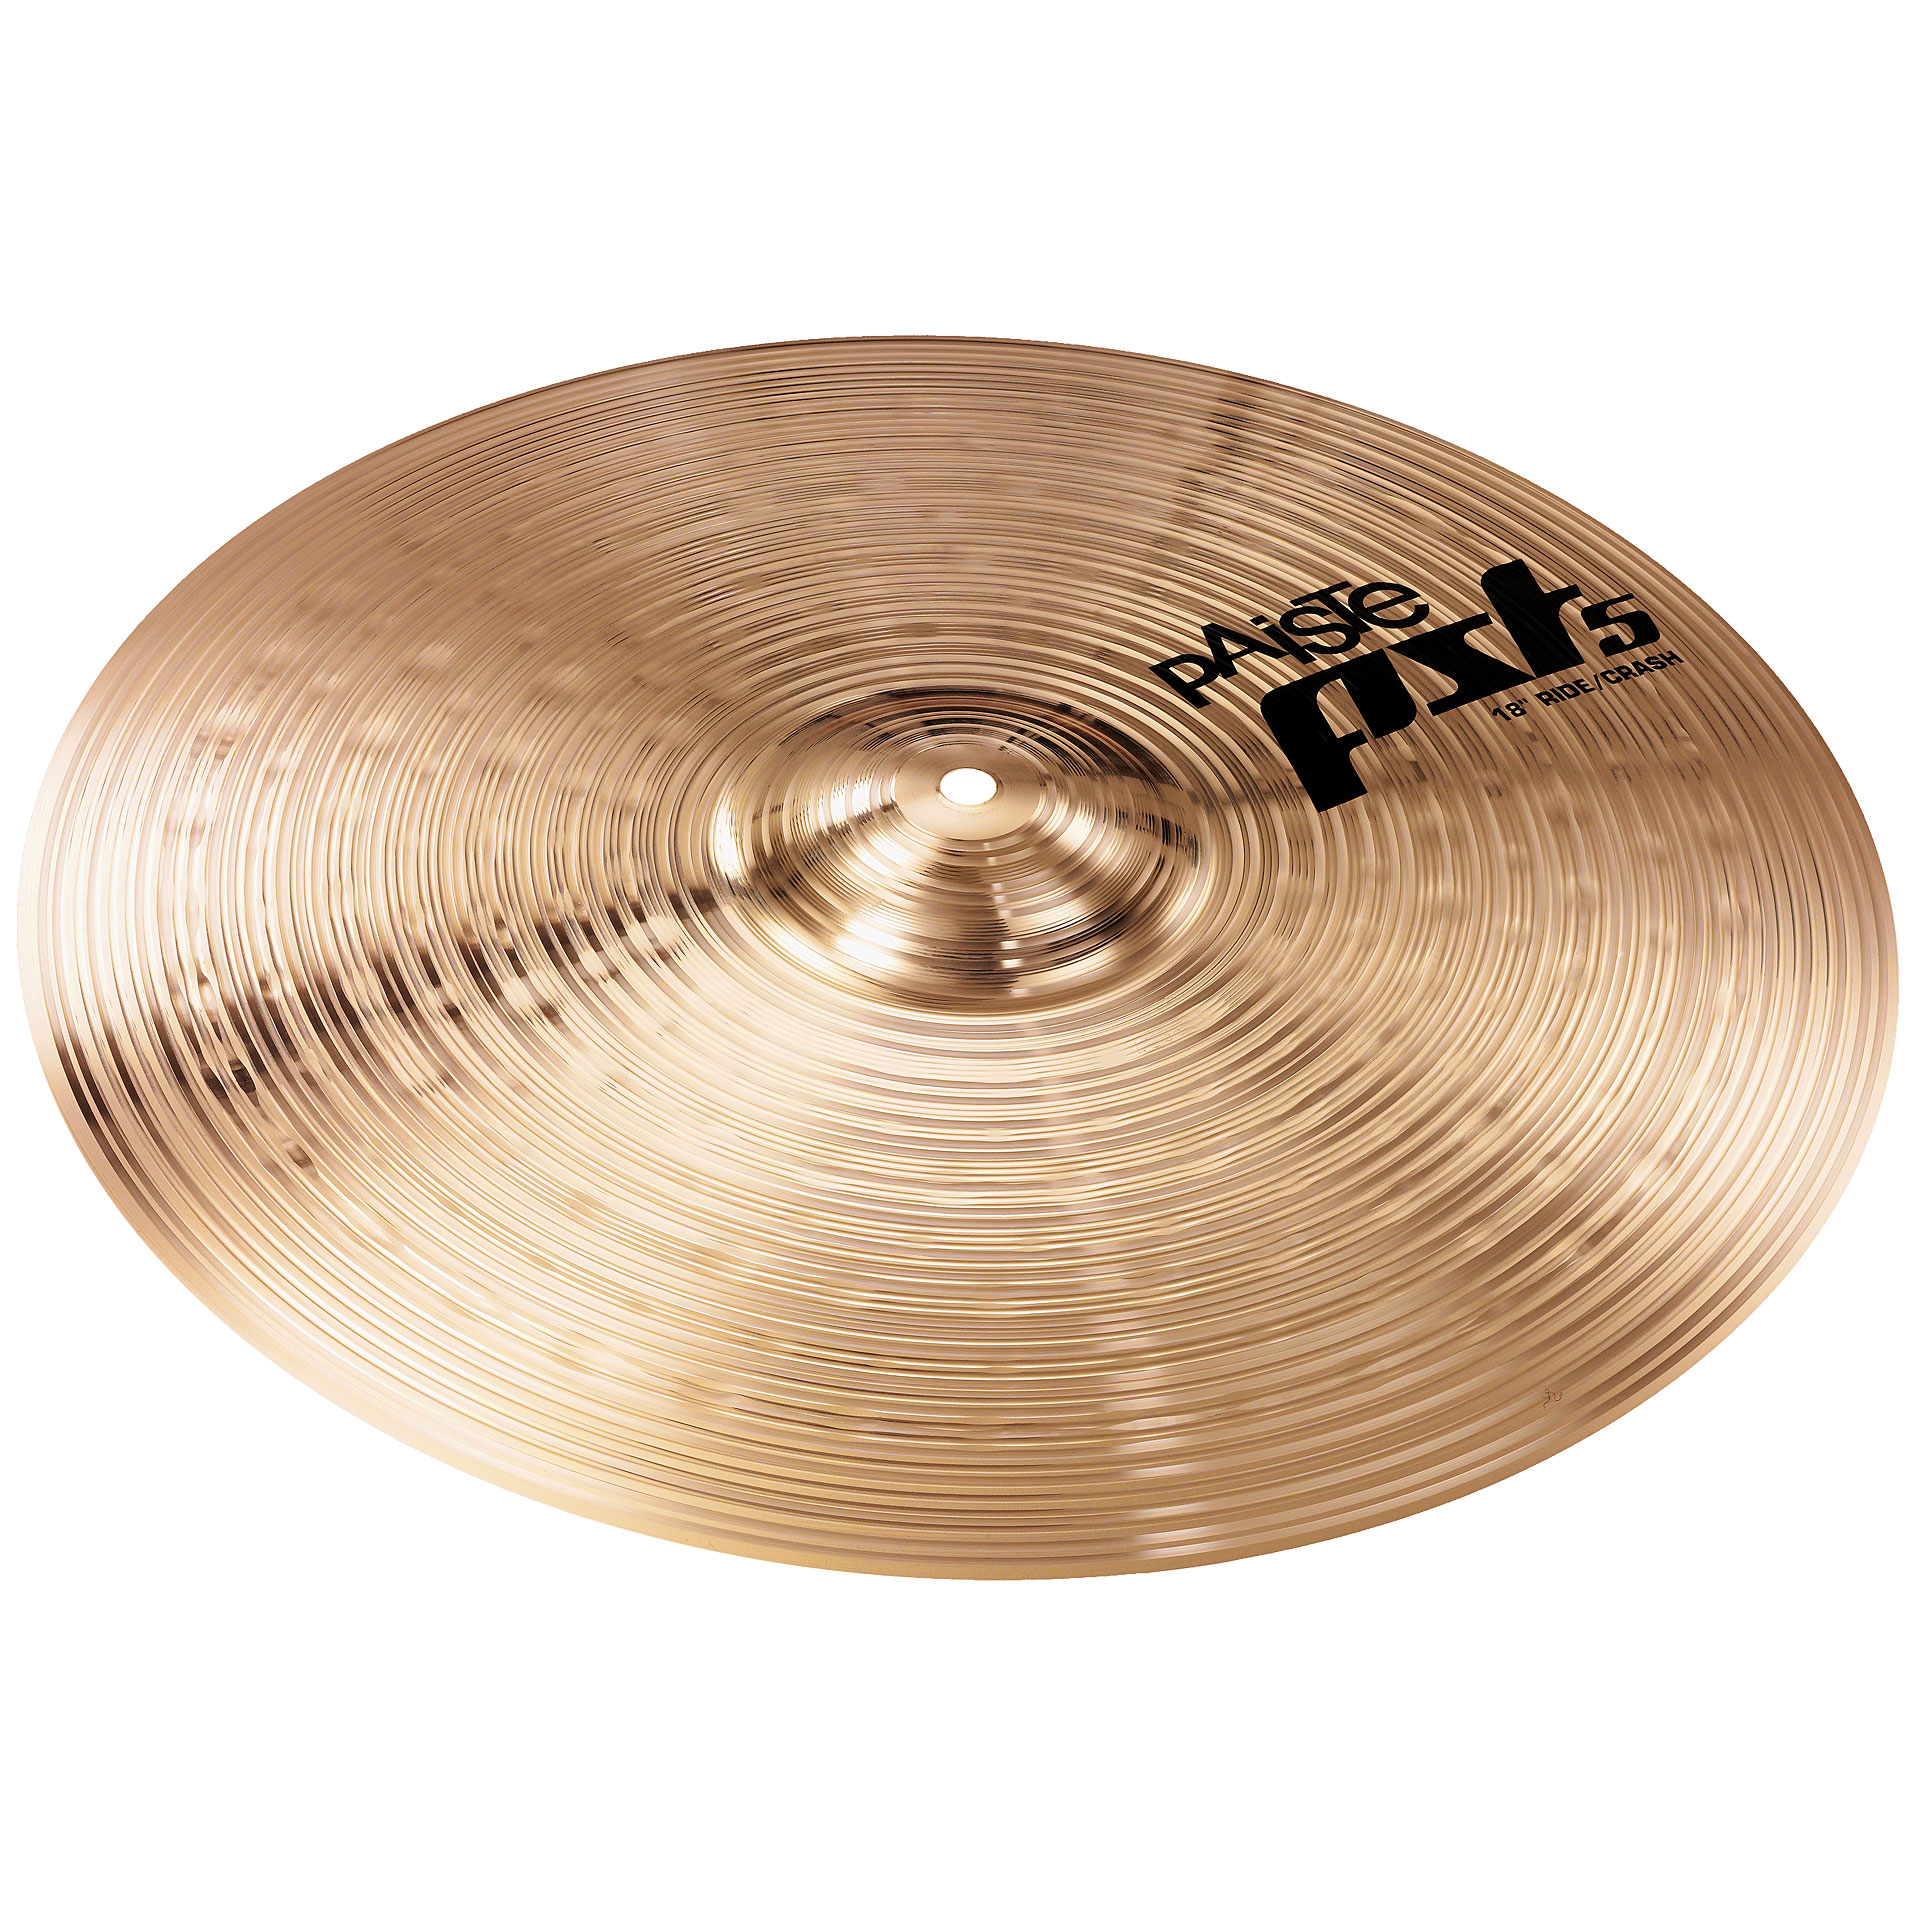 Buy Paiste PST5 crash ride cymbal online in  India